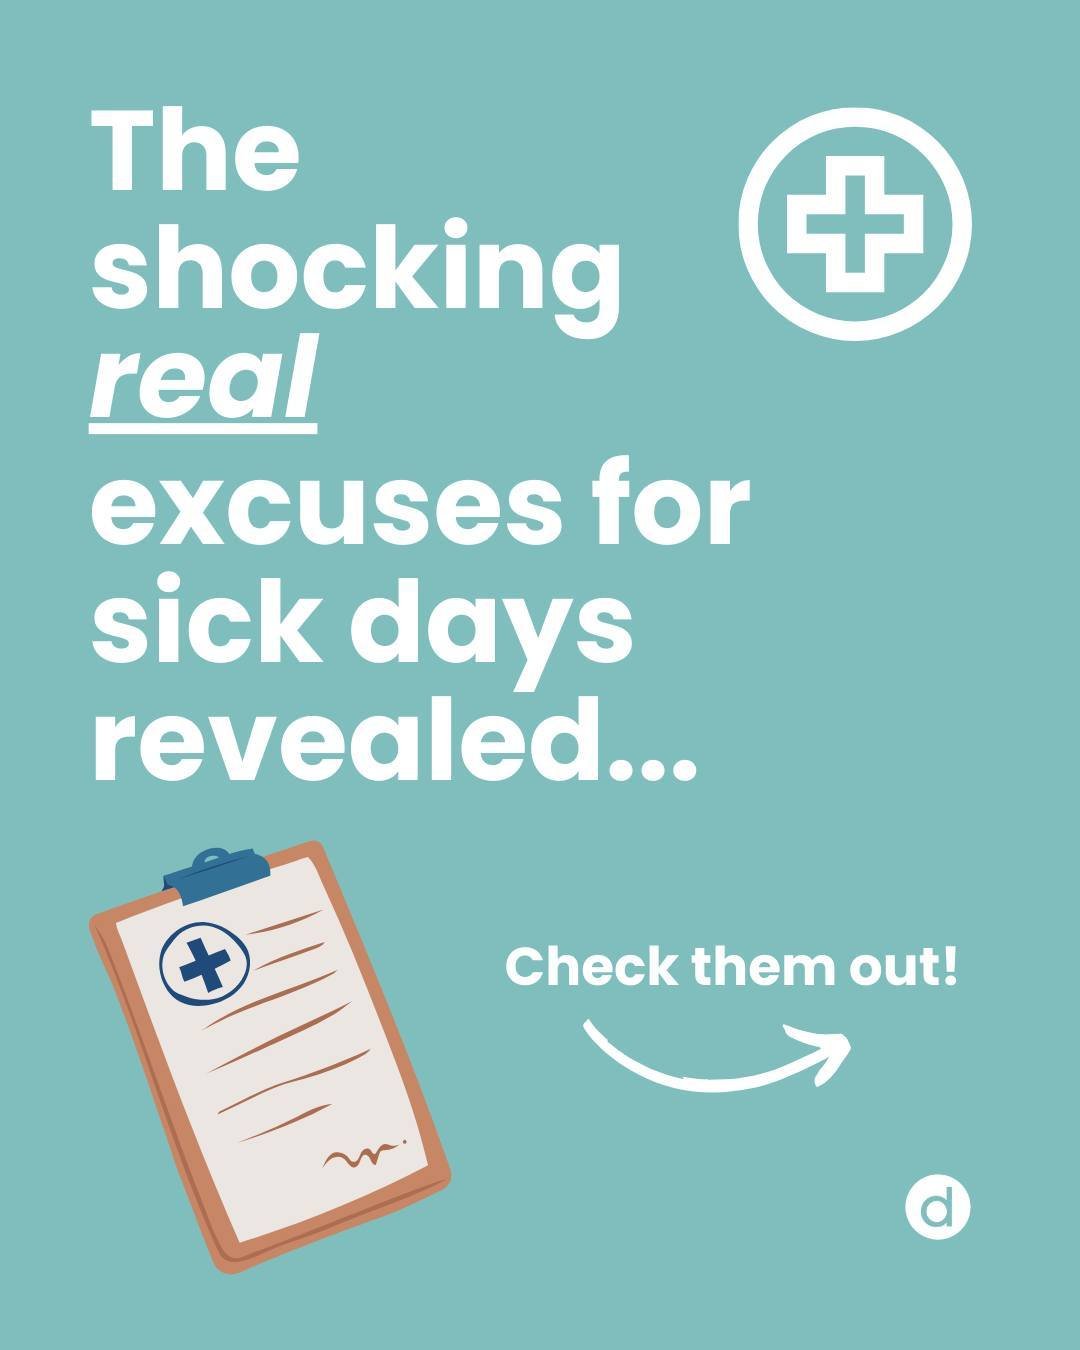 Believe it or not 🤯 - the shocking REAL excuses used for sick days, shared by HR professional Graham Grieve.

Could you imagine receiving these at your office! 😅 

See the full article: https://hrnews.co.uk/believe-it-or-not-hr-manager-shares-shock